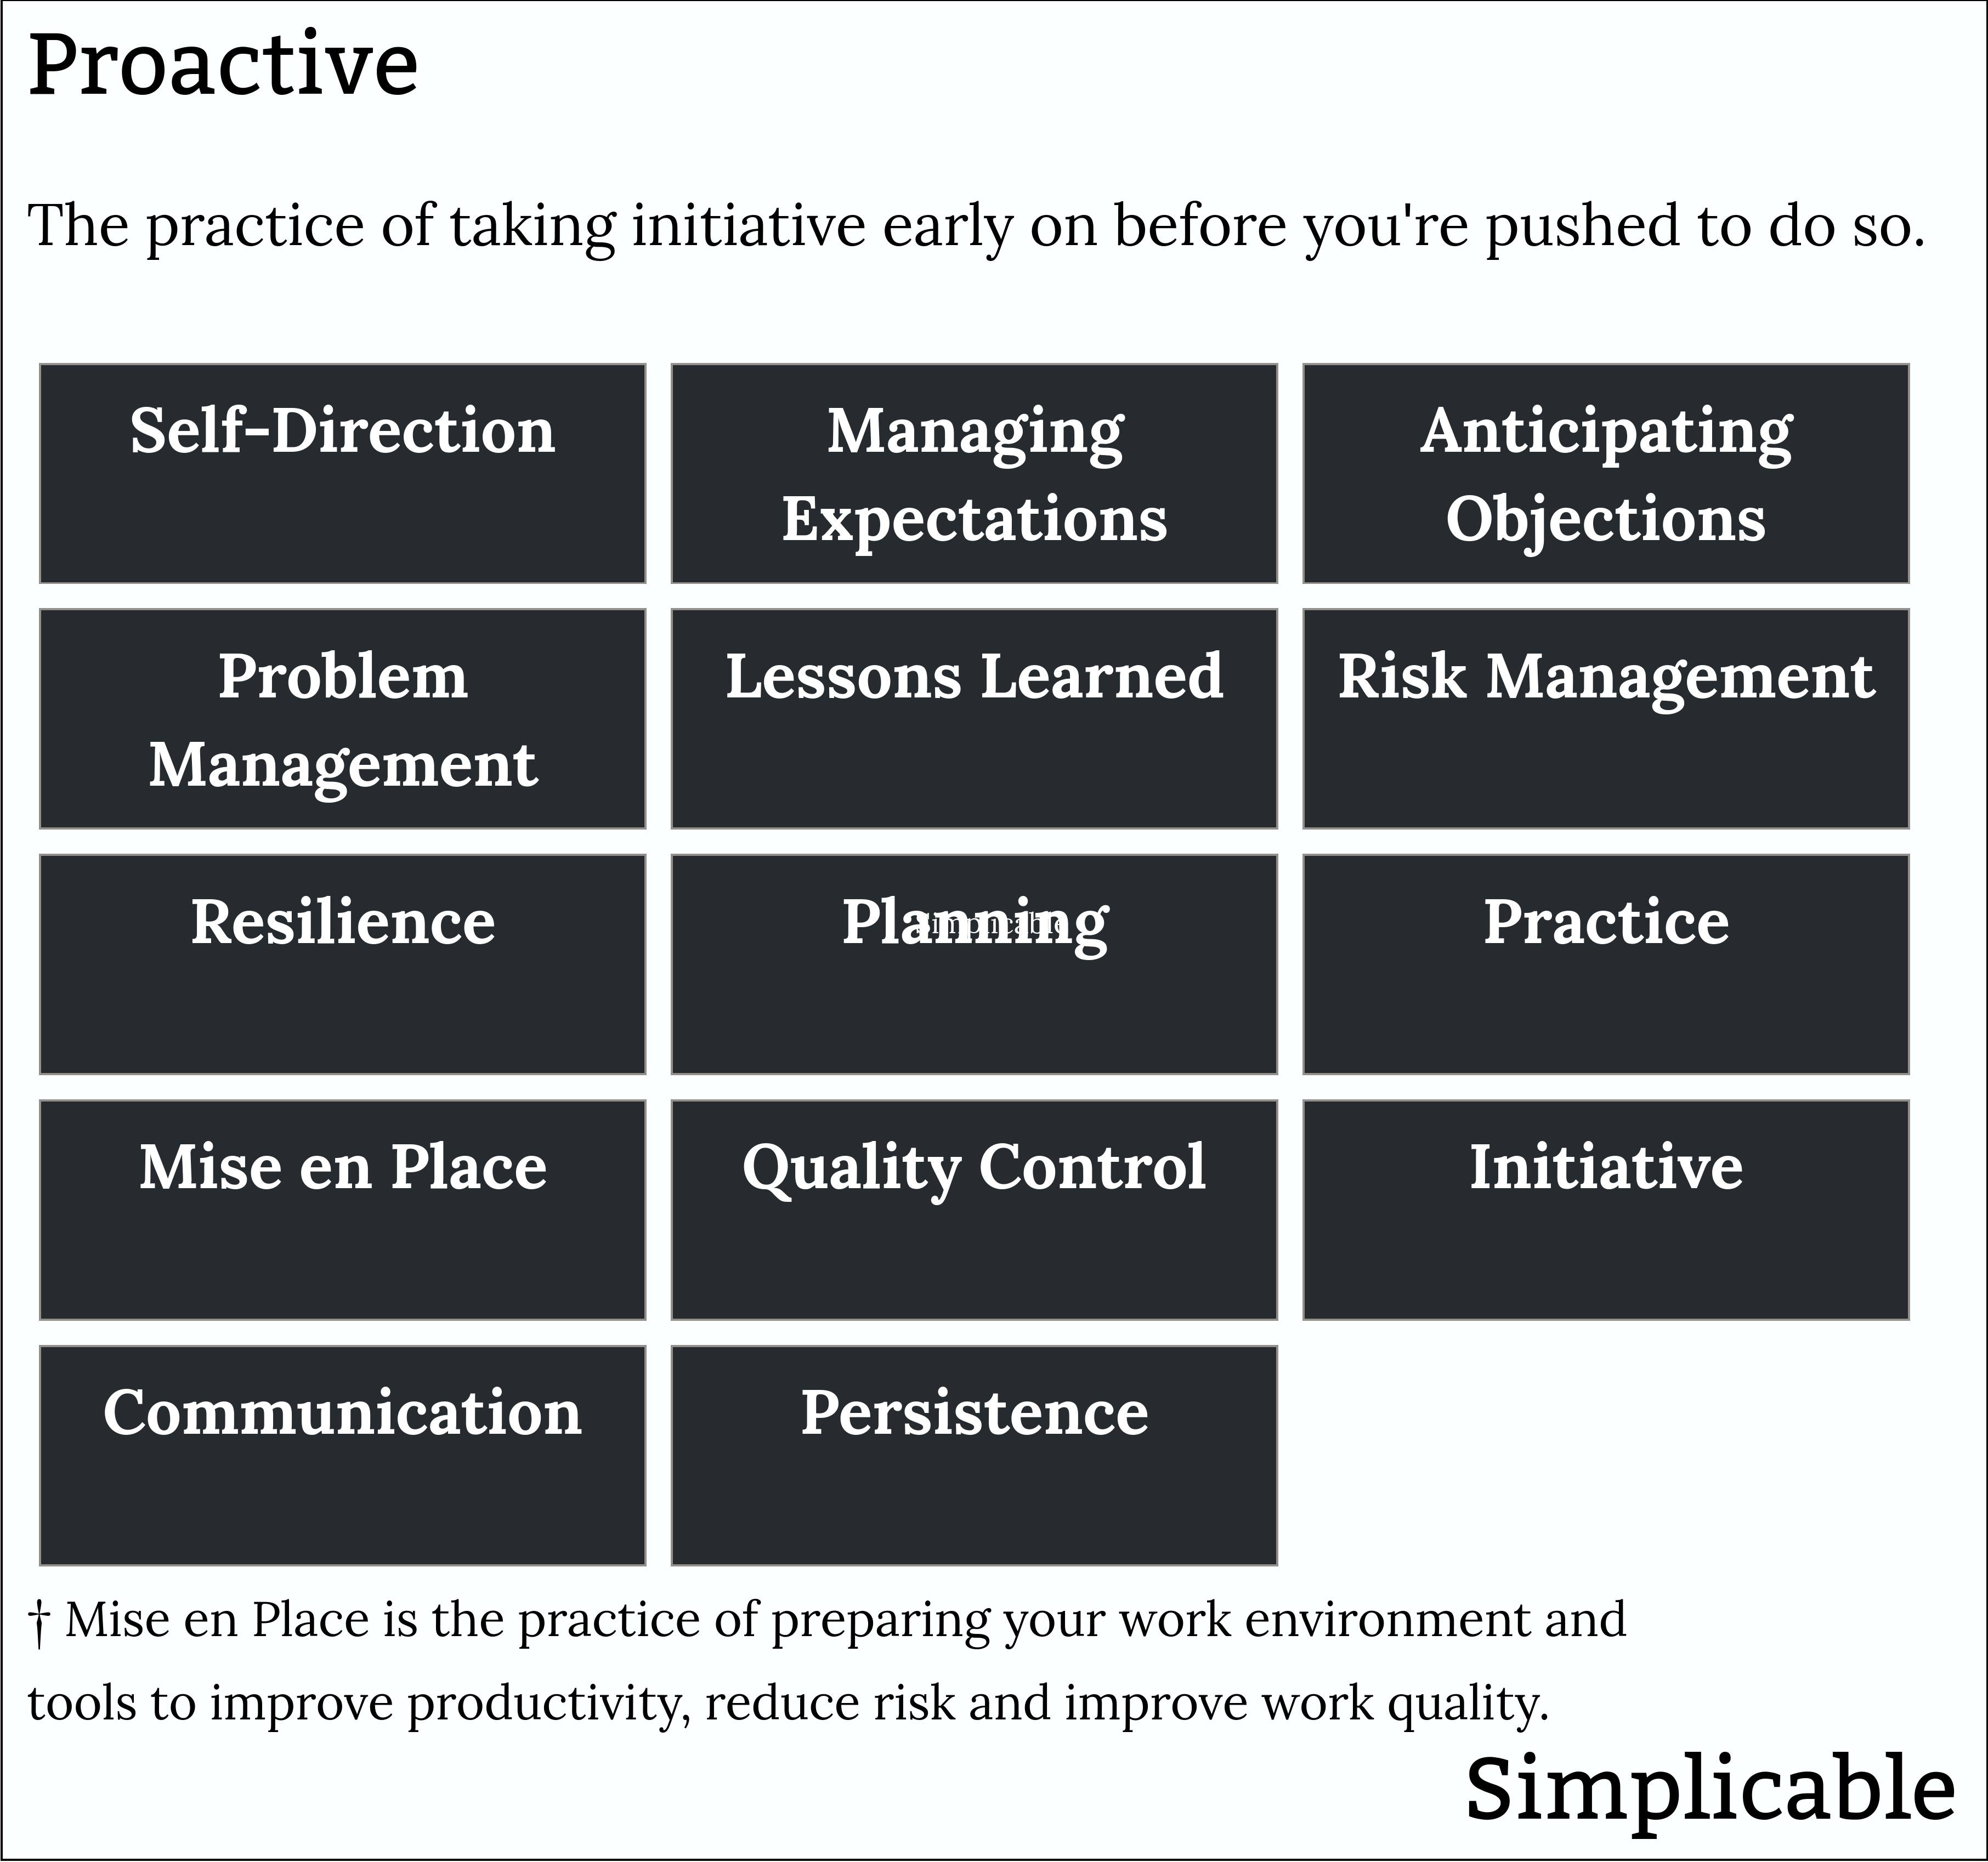 examples of proactive approaches